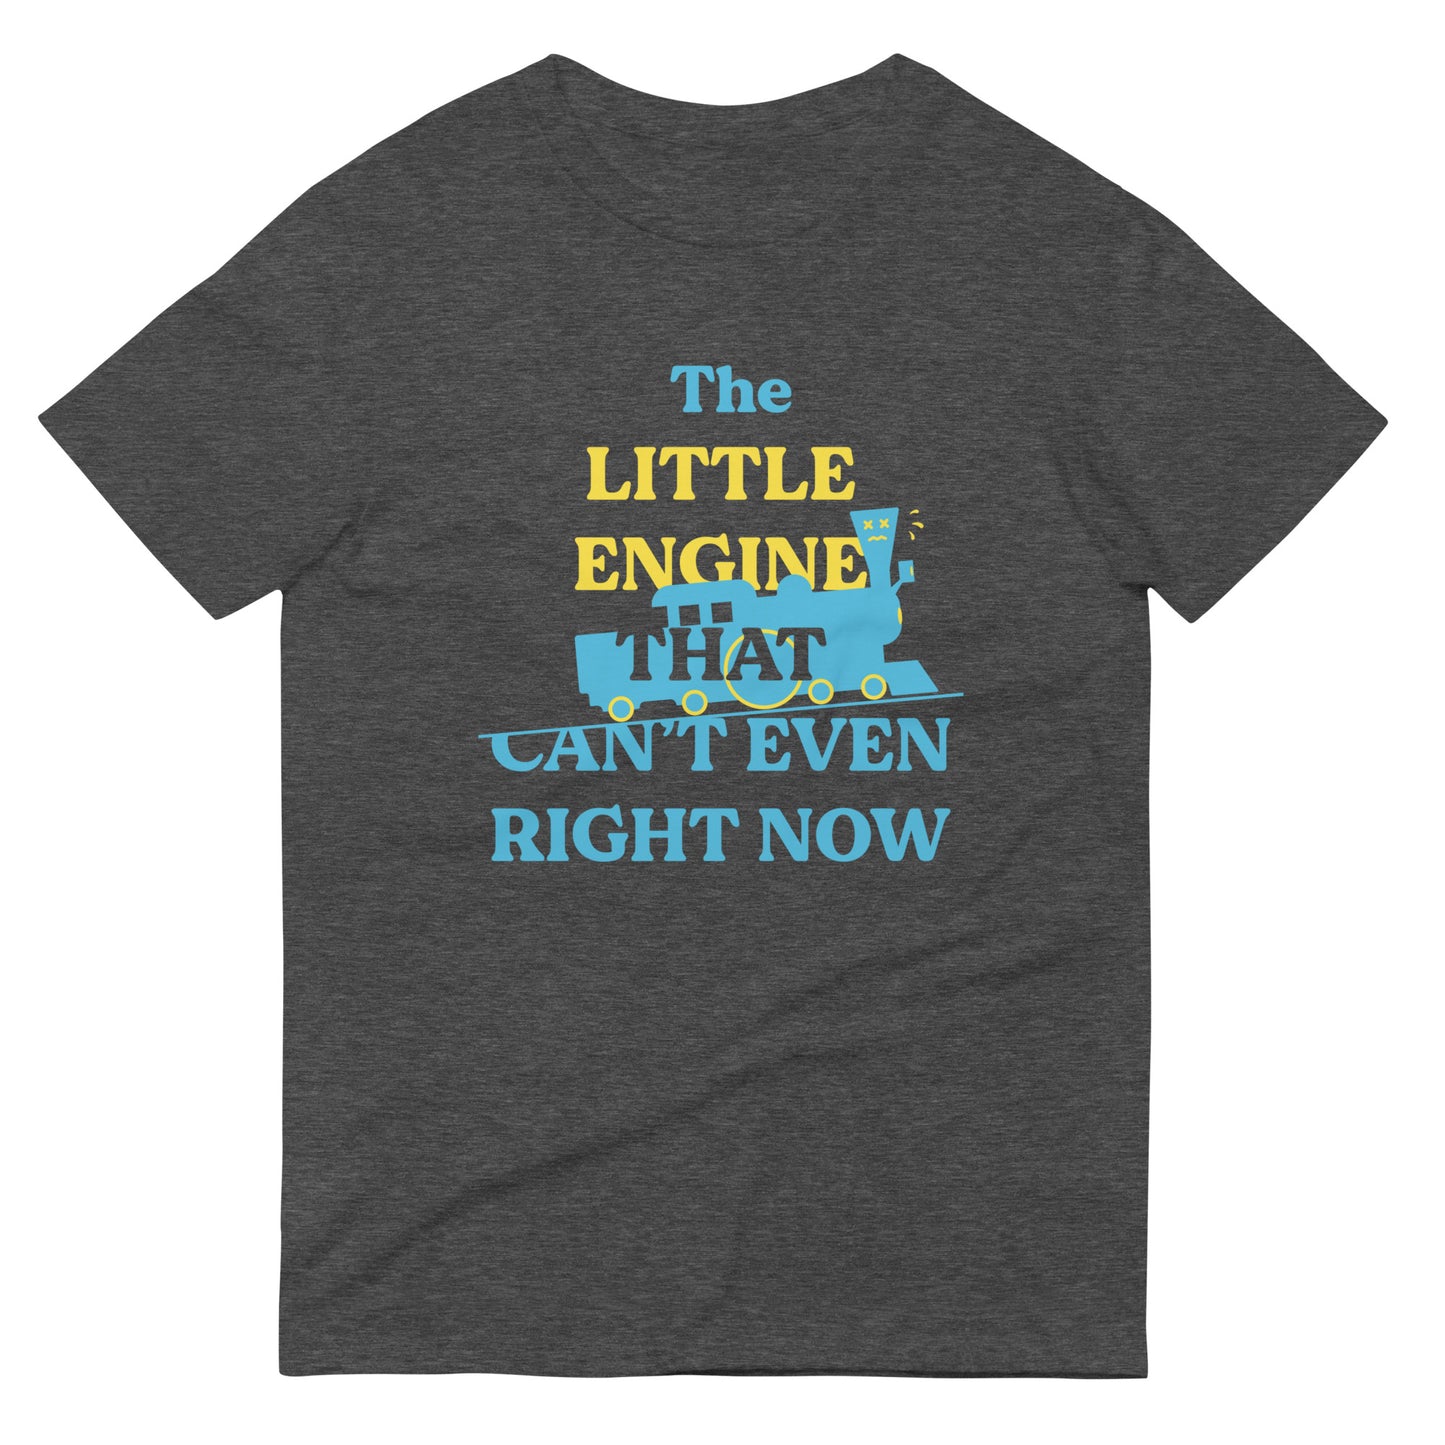 The Little Engine That Can't Even Right Now Men's Signature Tee